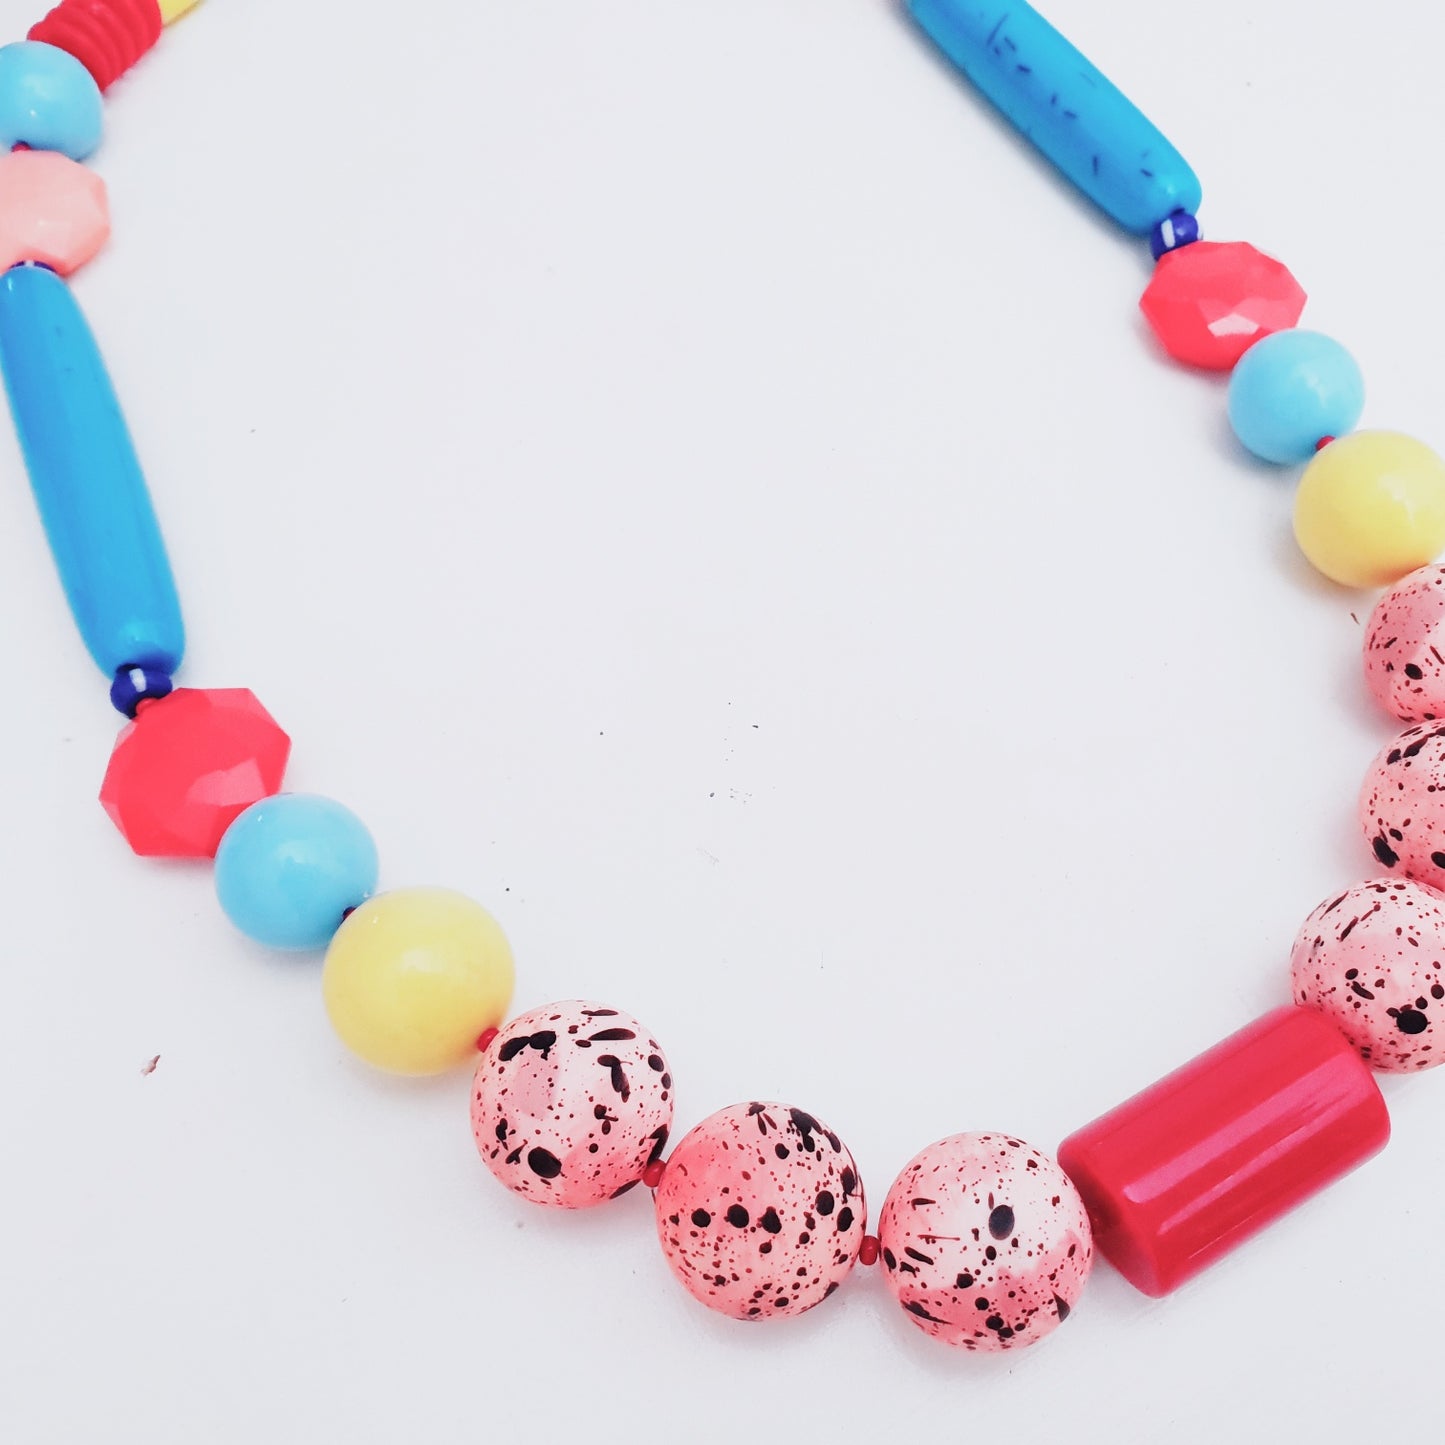 DIY Beaded Colourful Necklace with Bonus Step by Step Video Tutorial - only 1 left